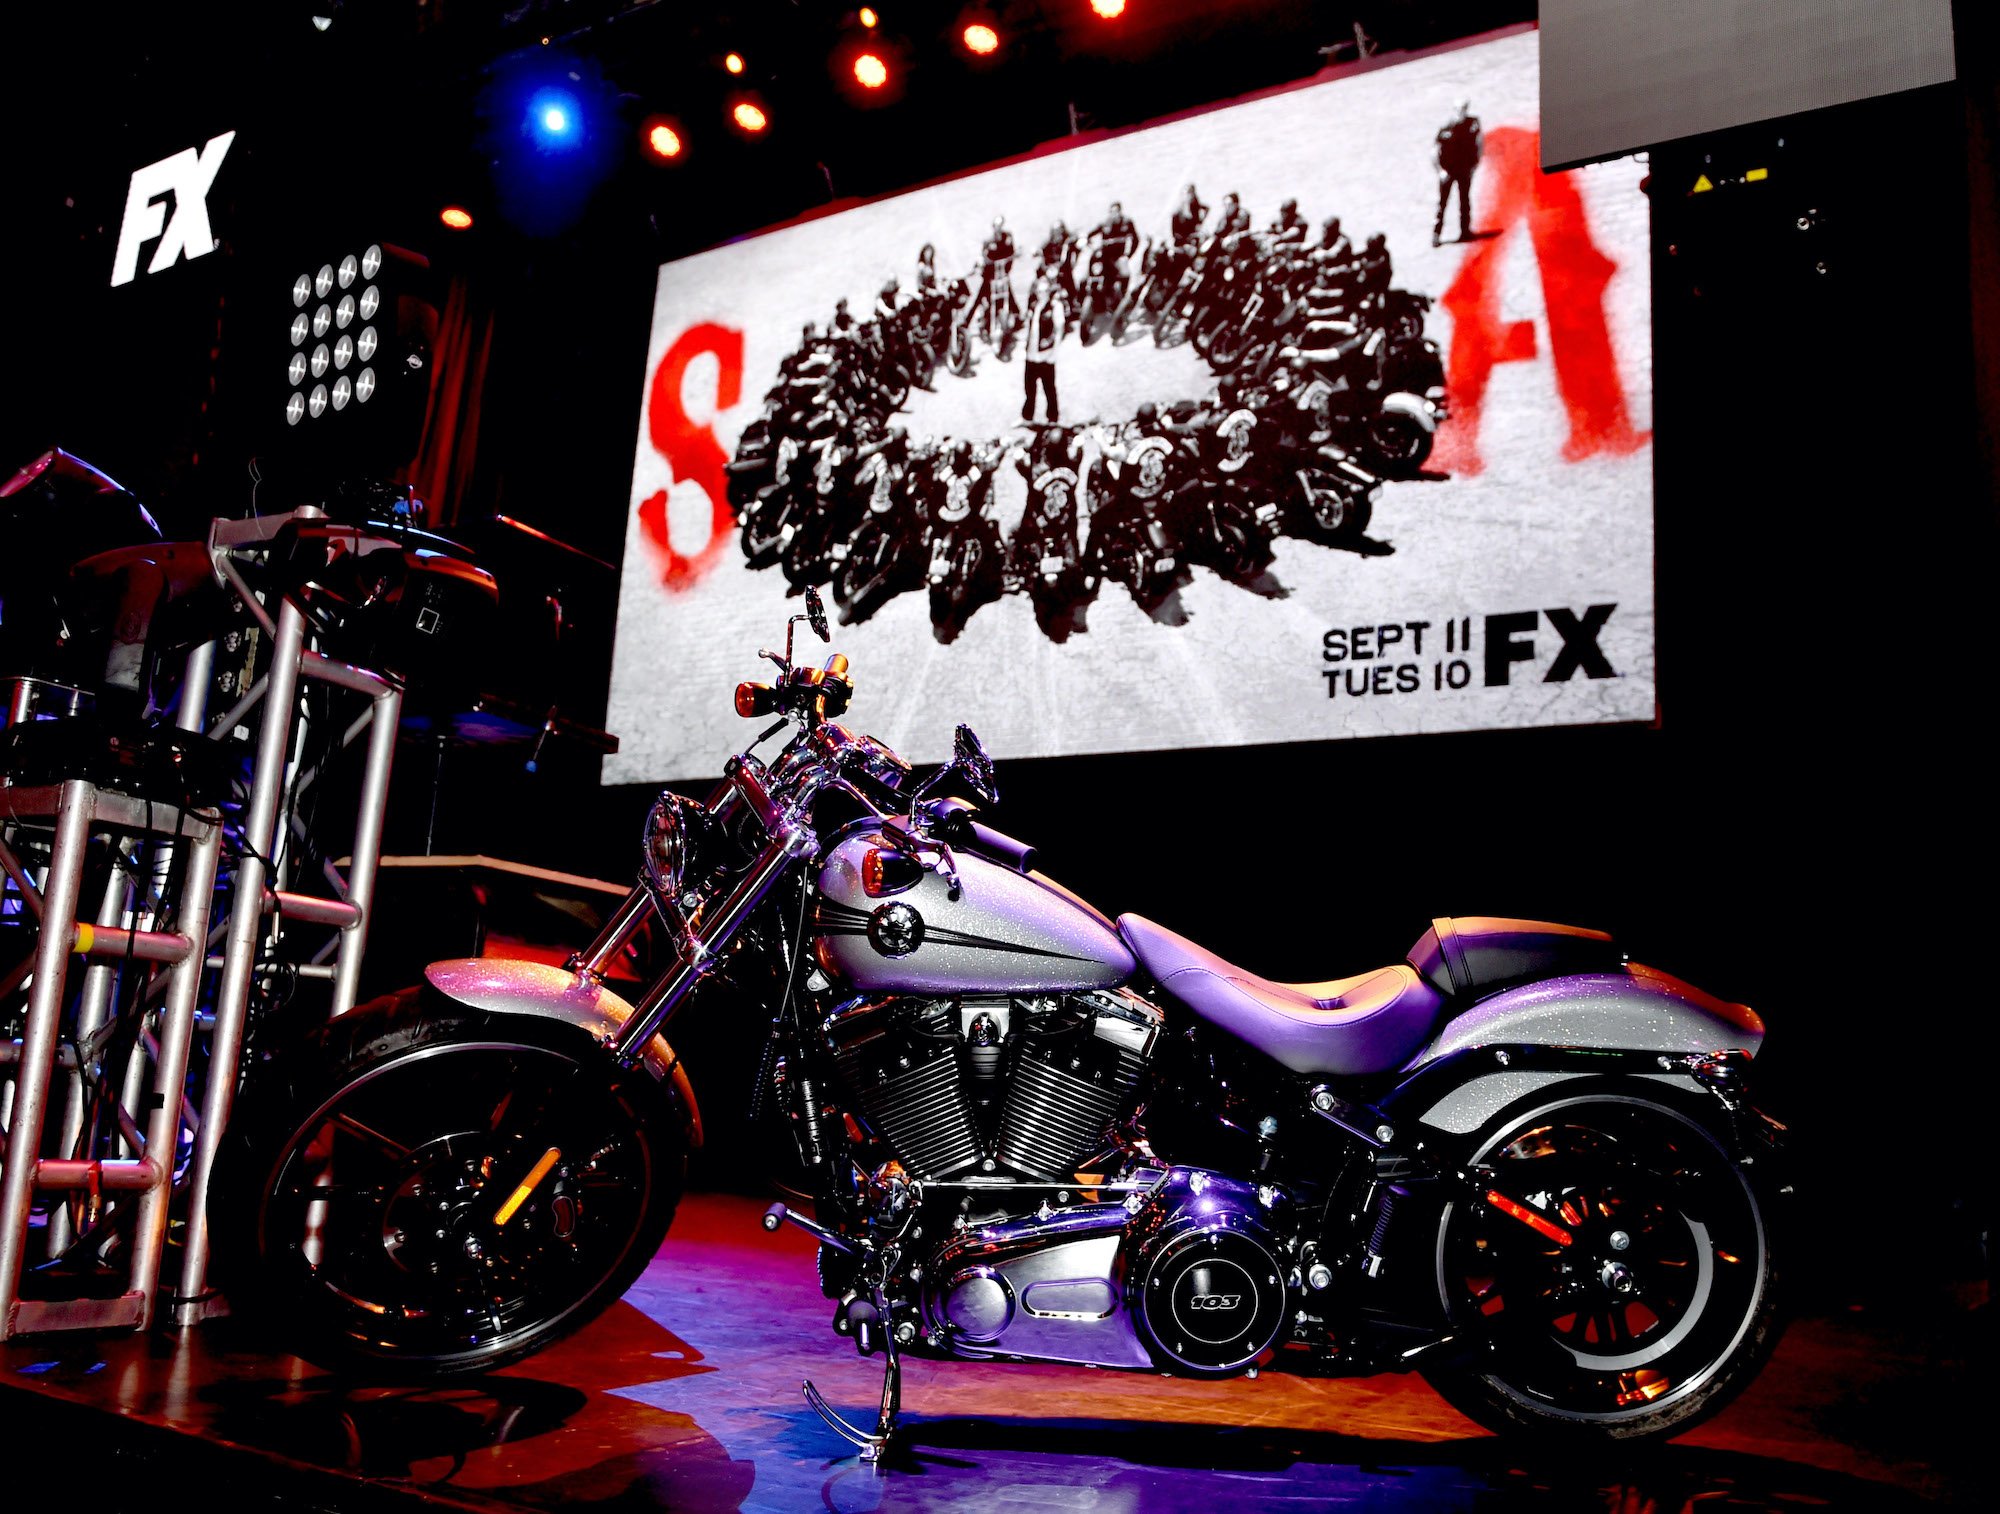 A motorcycle in front of a 'Sons of Anarchy' promo